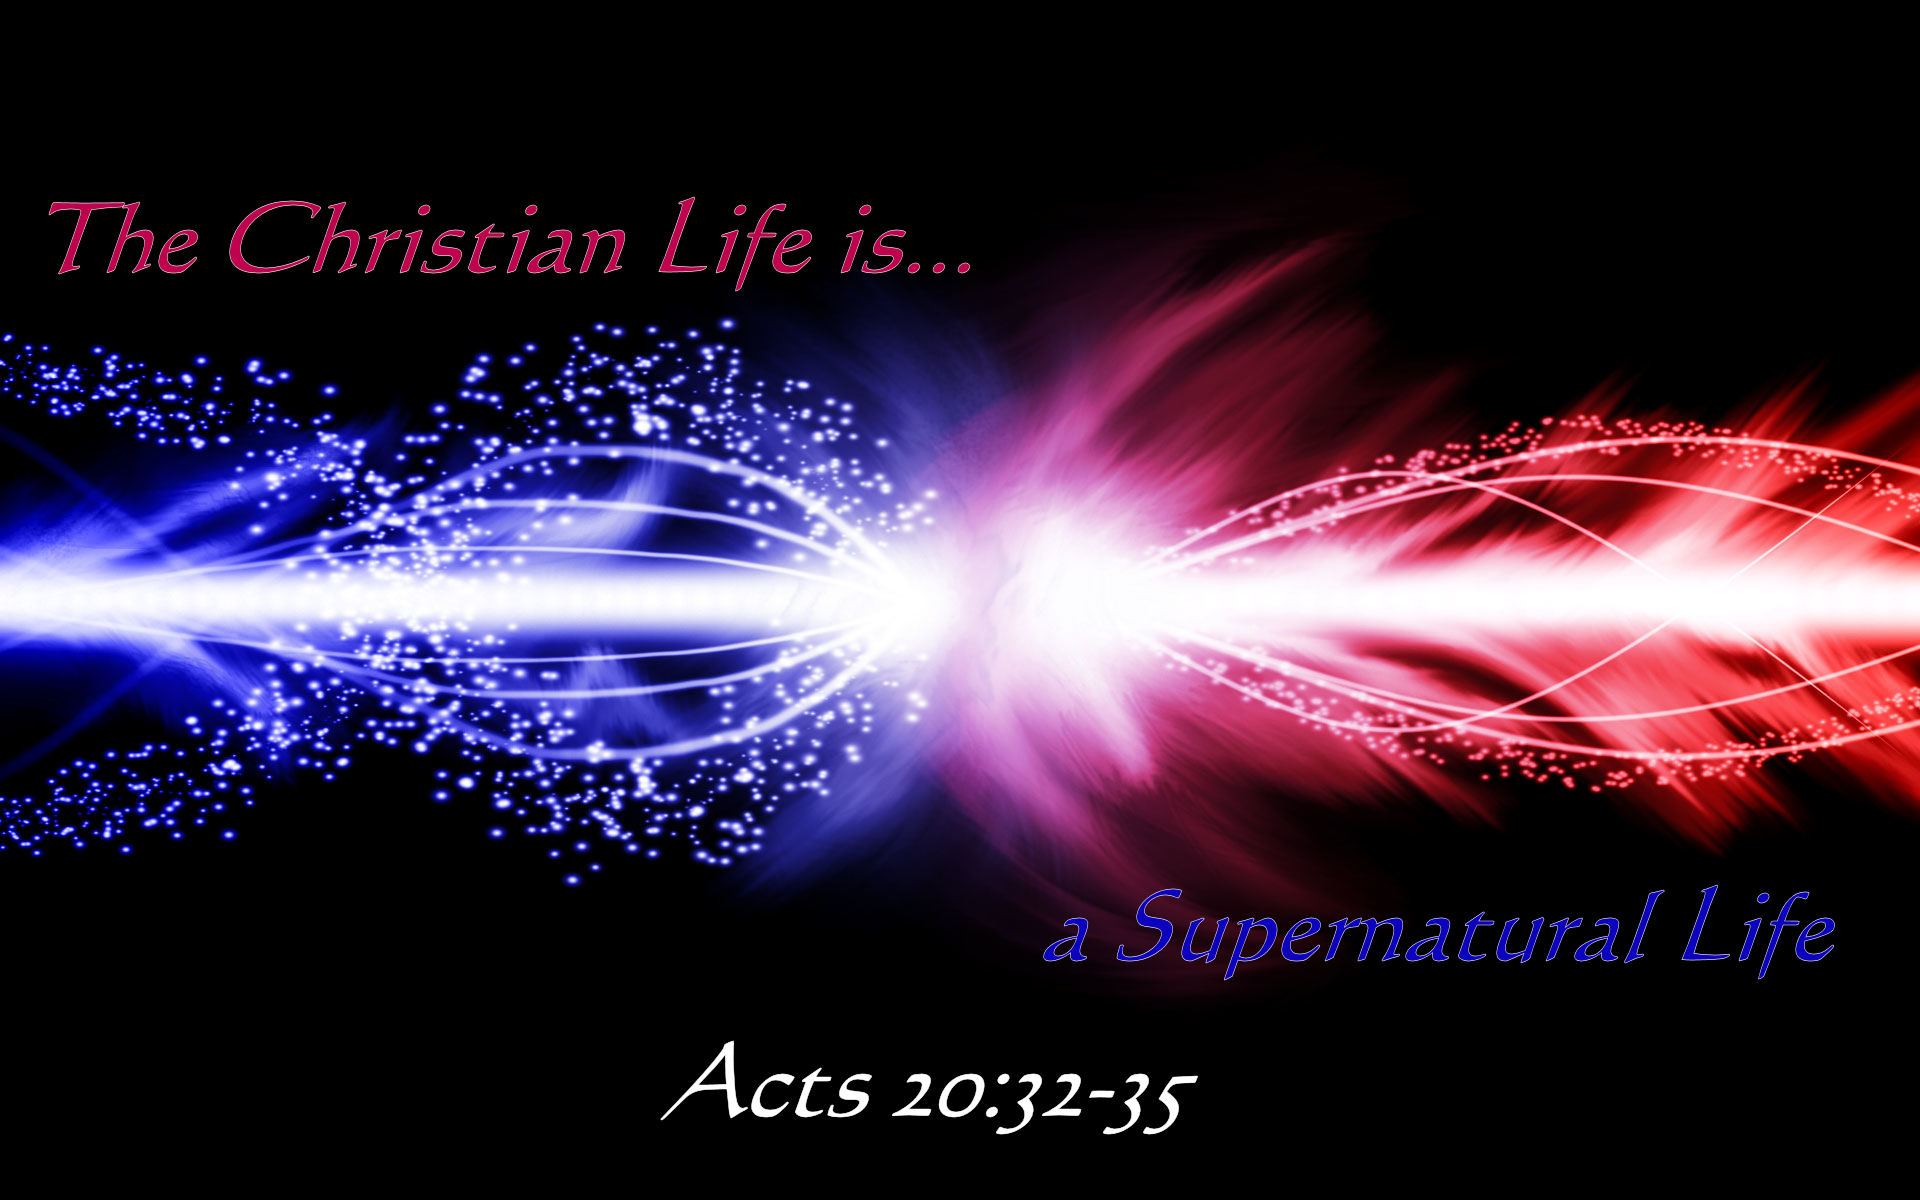 Making the supernatural your lifestyle …